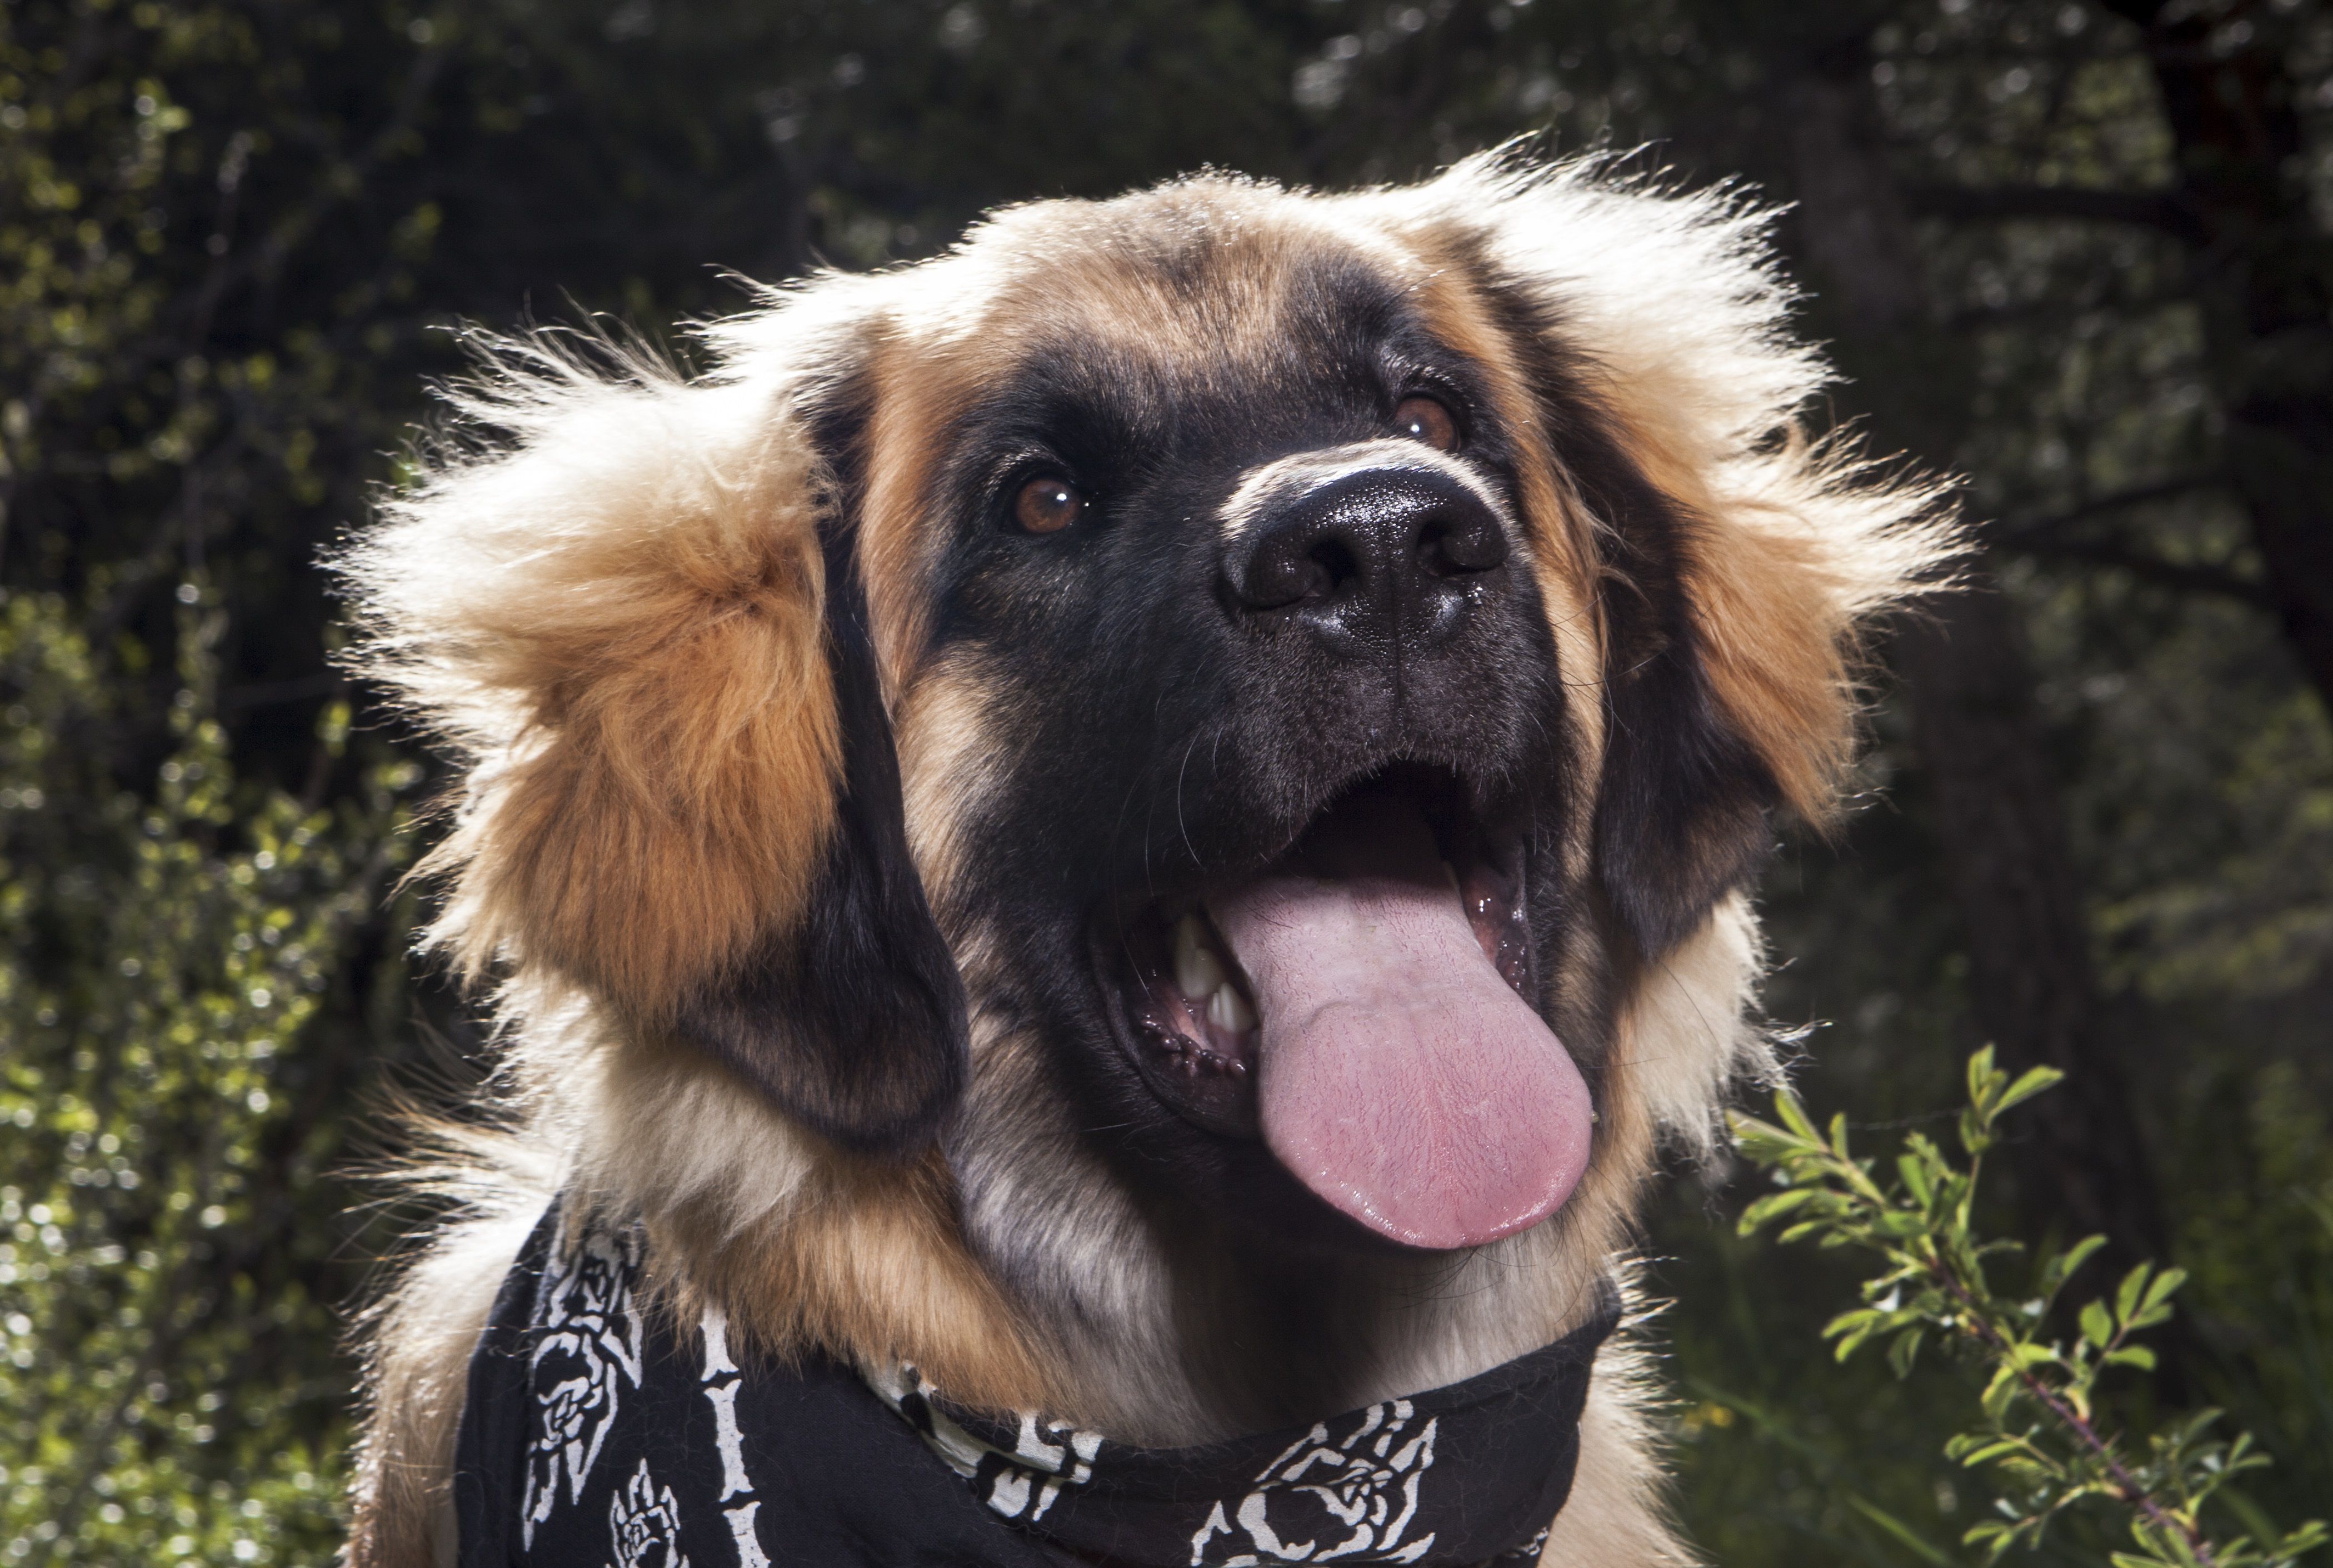 Leonberger dog with tongue hanging out